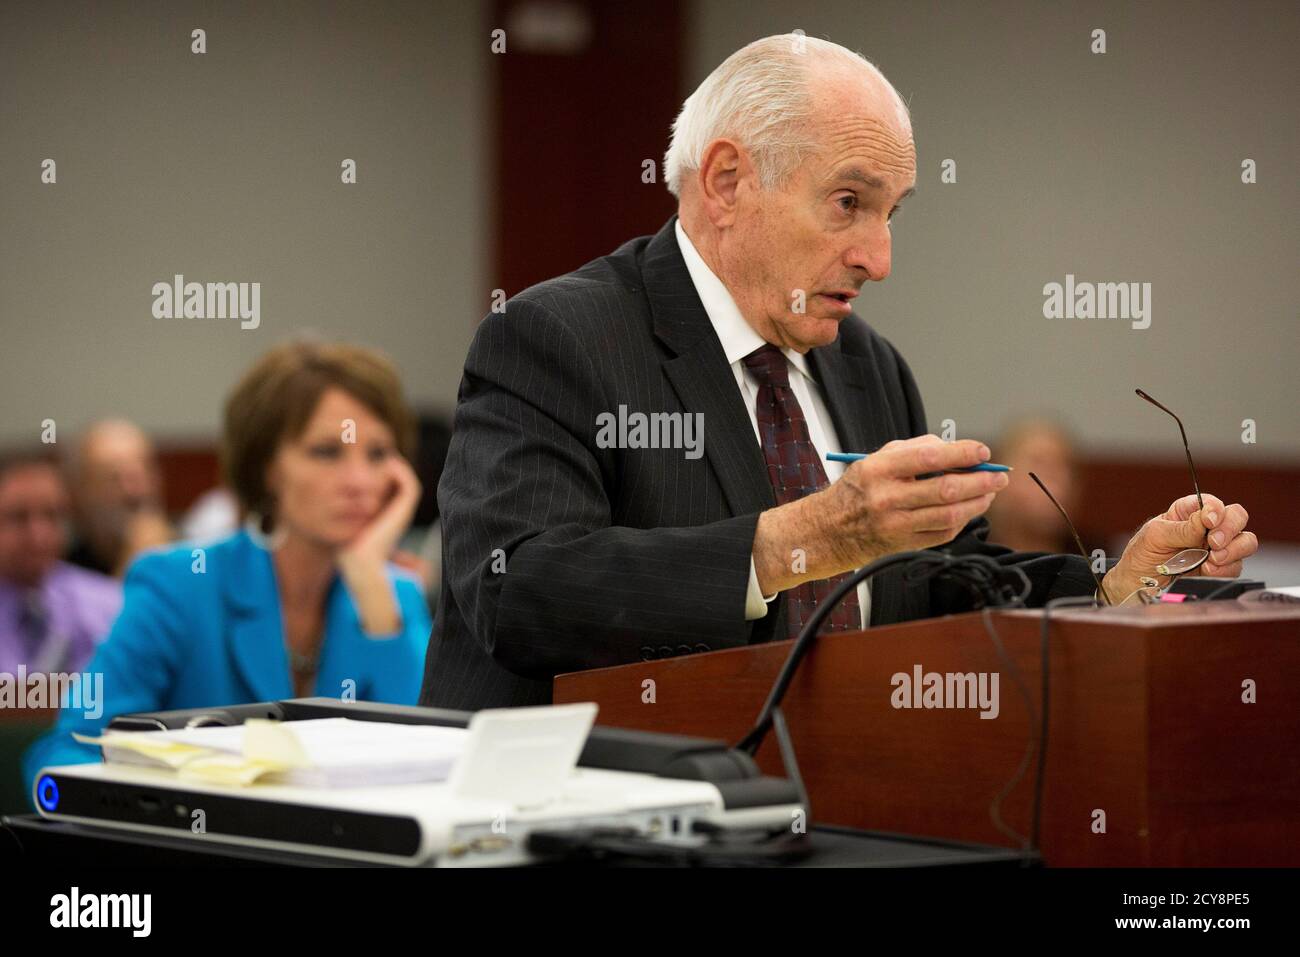 Chief deputy Clark County district attorney H. Leon Simon questions O.J. Simpson during an evidentiary hearing in Clark County District Court in Las Vegas, Nevada May 15, 2013. Simpson, who is currently serving a nine to 33-year sentence in state prison as a result of his October 2008 conviction for armed robbery and kidnapping charges, is using a writ of habeas corpus, to seek a new trial, claiming he had such bad representation that his conviction should be reversed.   REUTERS/Julie Jacobson/Pool  (UNITED STATES  - Tags: CRIME LAW SPORT ENTERTAINMENT) Stock Photo